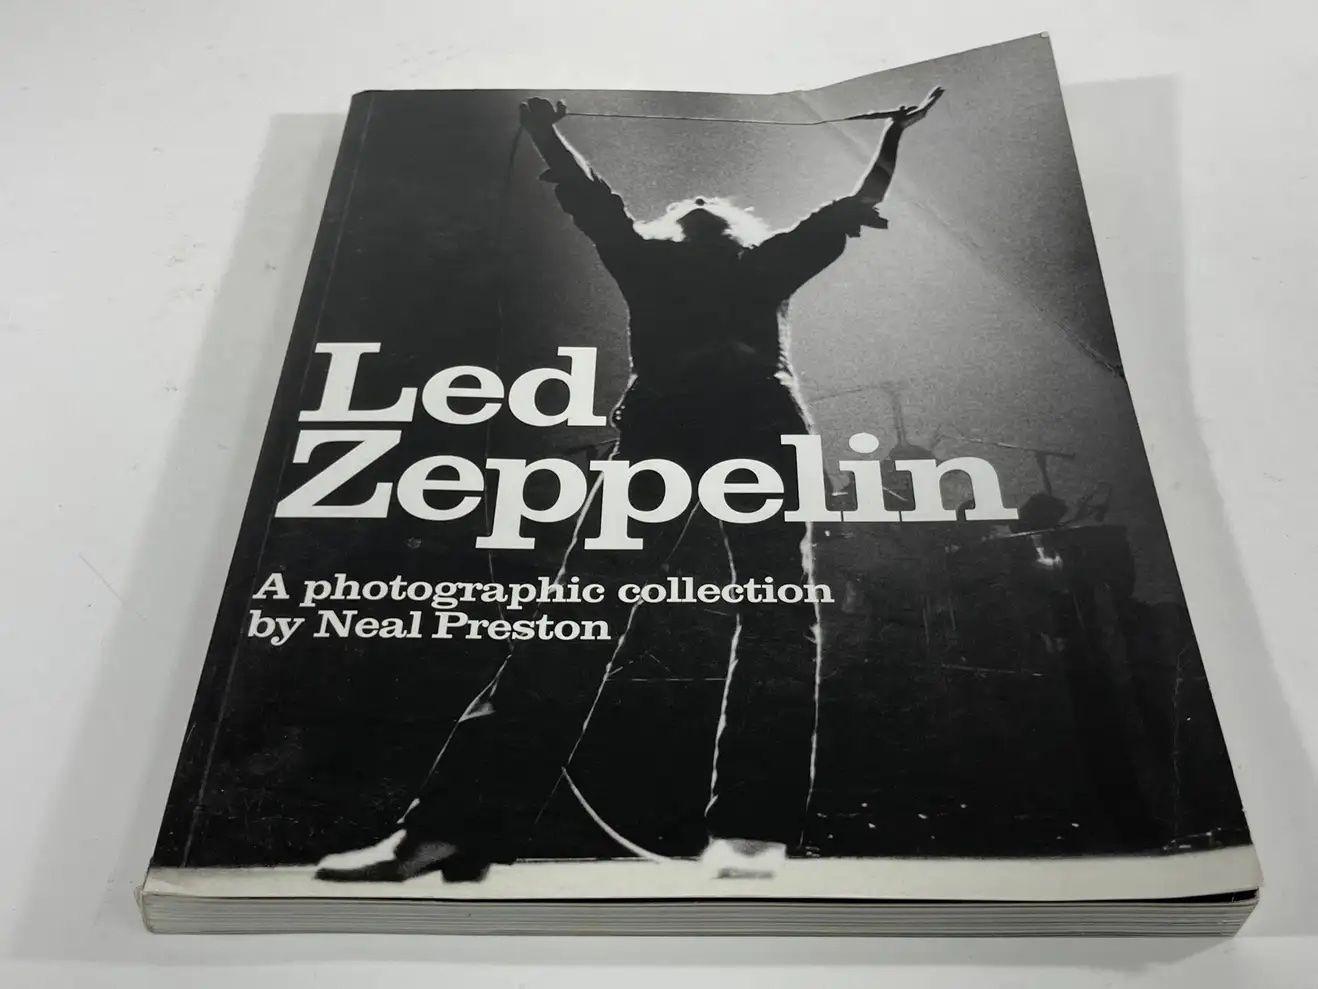 Led Zeppelin A Photographic Collection Book by Neal Preston.
Led Zeppelin: A Photographic Collection Book by Neal Preston. 1st Edition: 2002, out of print. Author: Neal Preston. Softcover book. 192 page large photo history book of the legendary